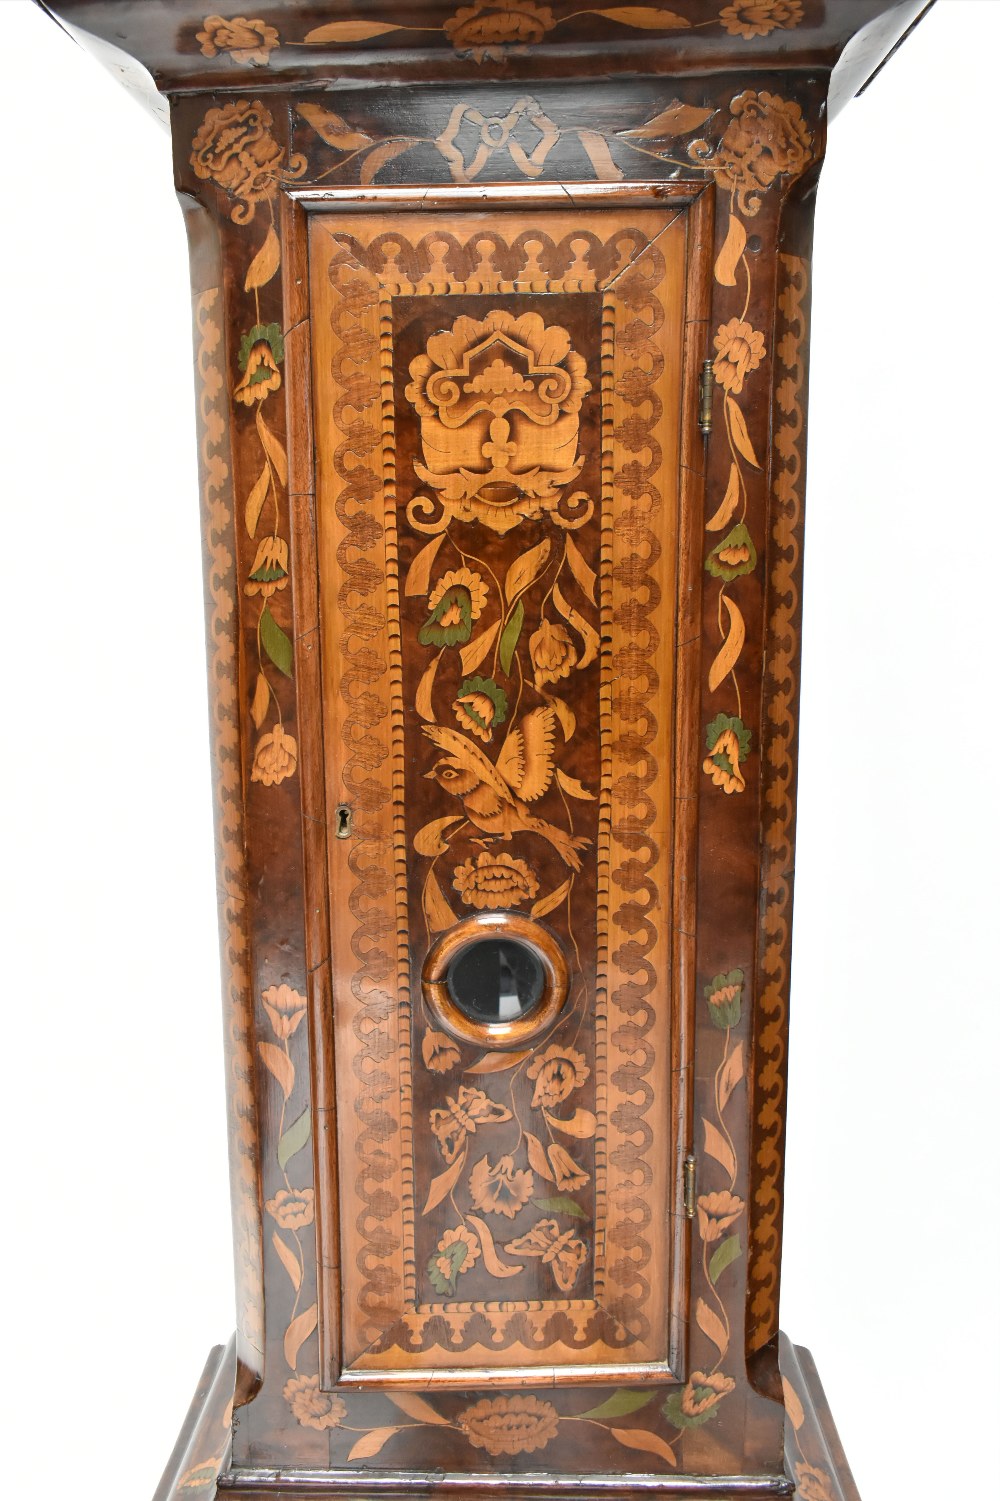 A 19th century Dutch longcase clock, the walnut case with marquetry inlay, the brass face with - Image 2 of 17